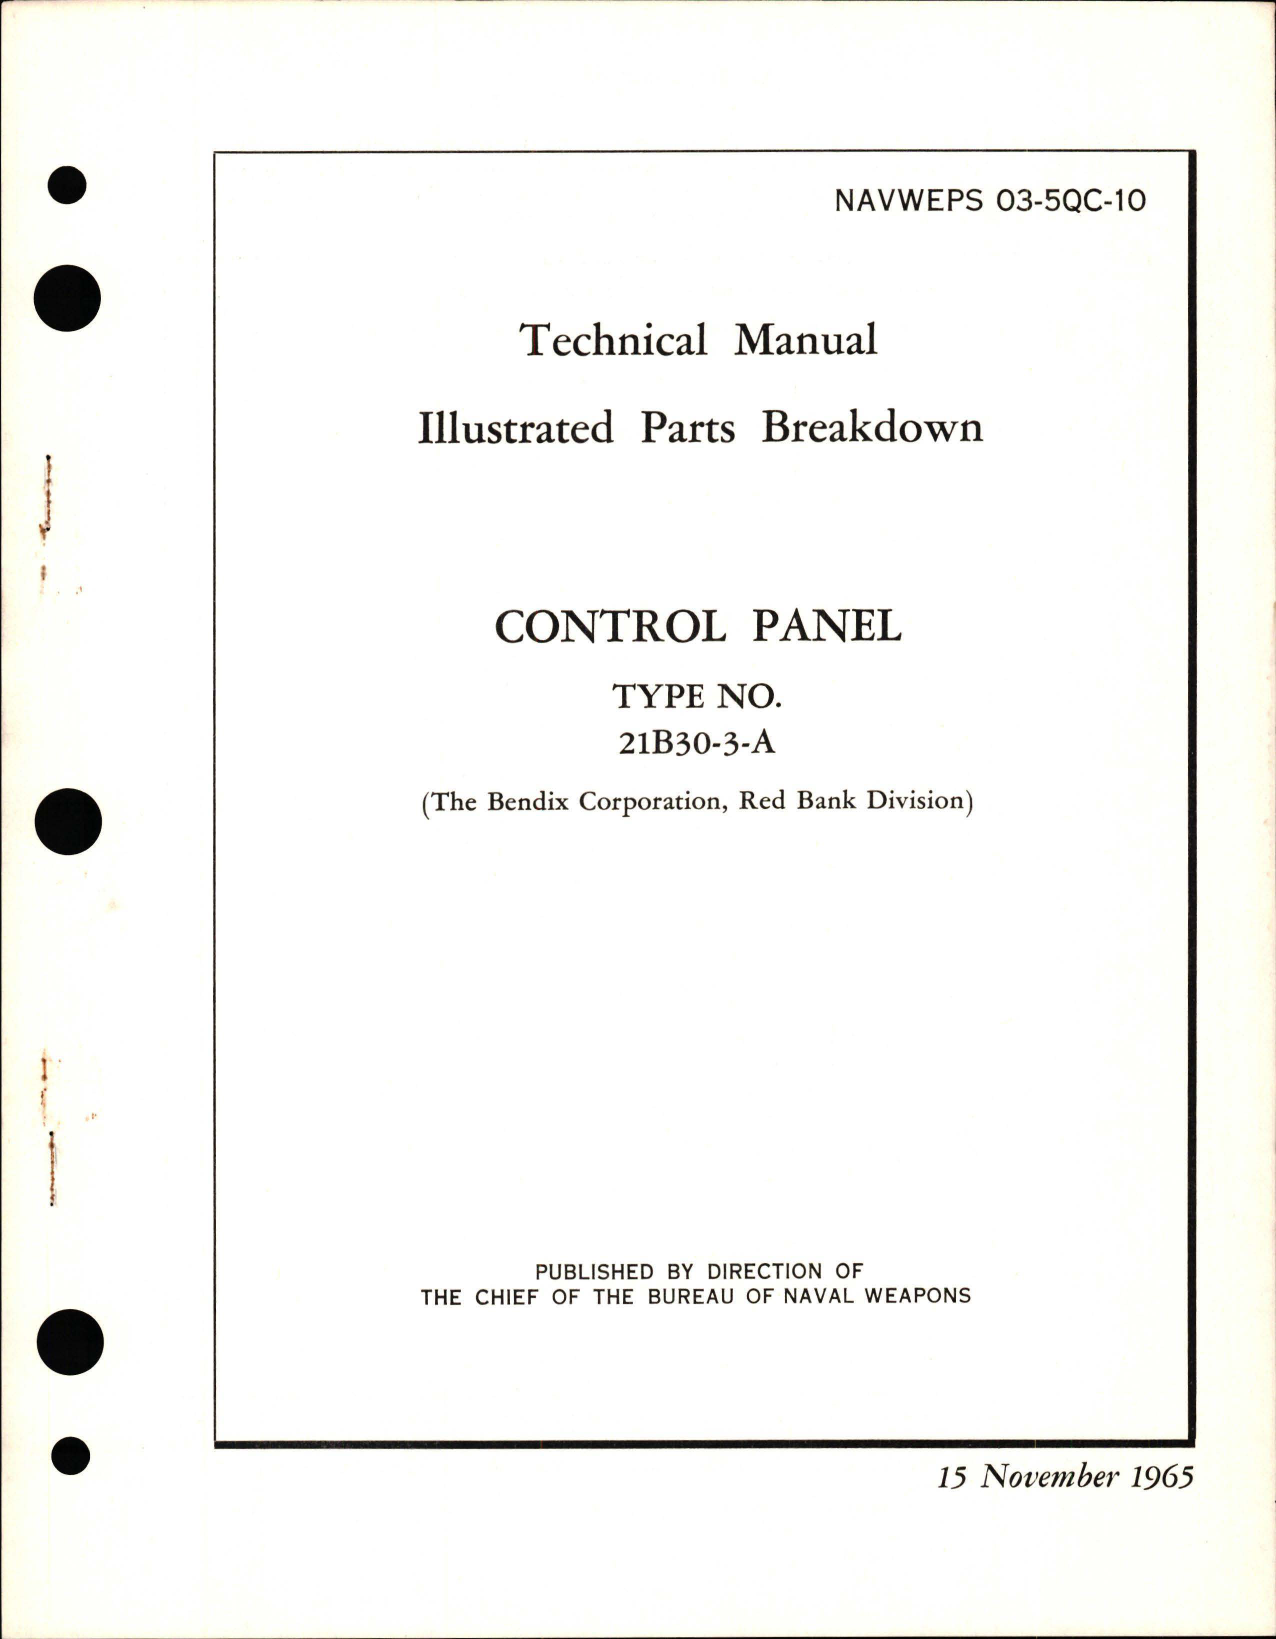 Sample page 1 from AirCorps Library document: Illustrated Parts Breakdown for Control Panel - Type 21B30-3-A